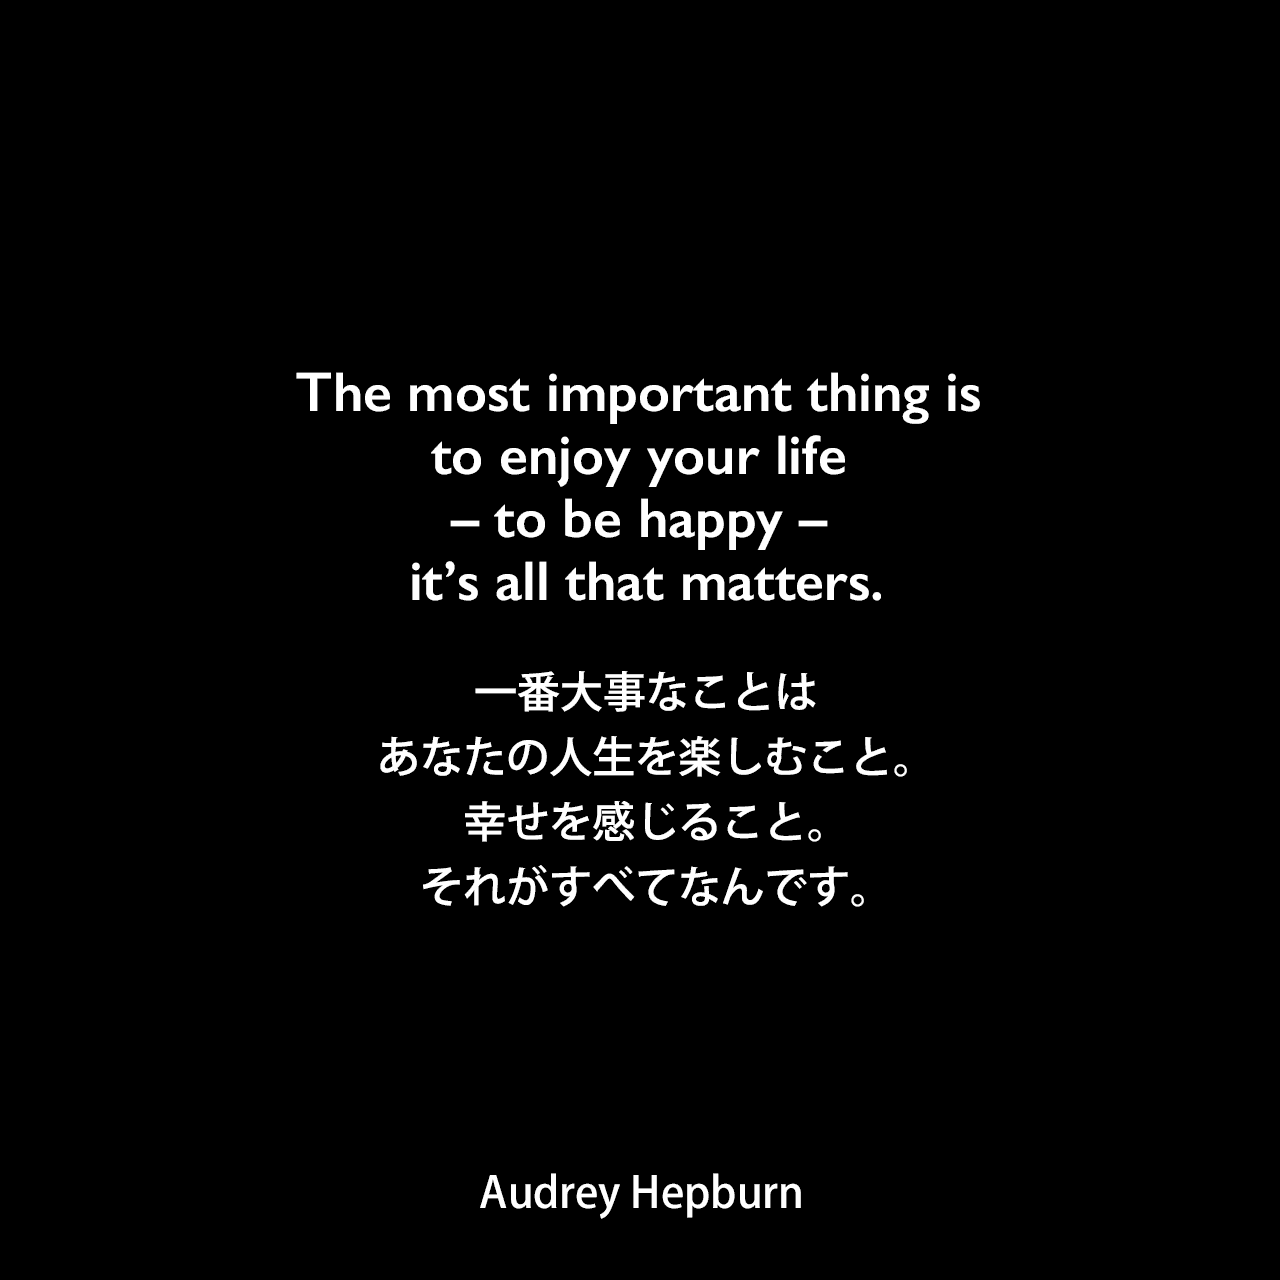 The most important thing is to enjoy your life – to be happy – it’s all that matters.一番大事なことは、あなたの人生を楽しむこと。幸せを感じること。それがすべてなんです。